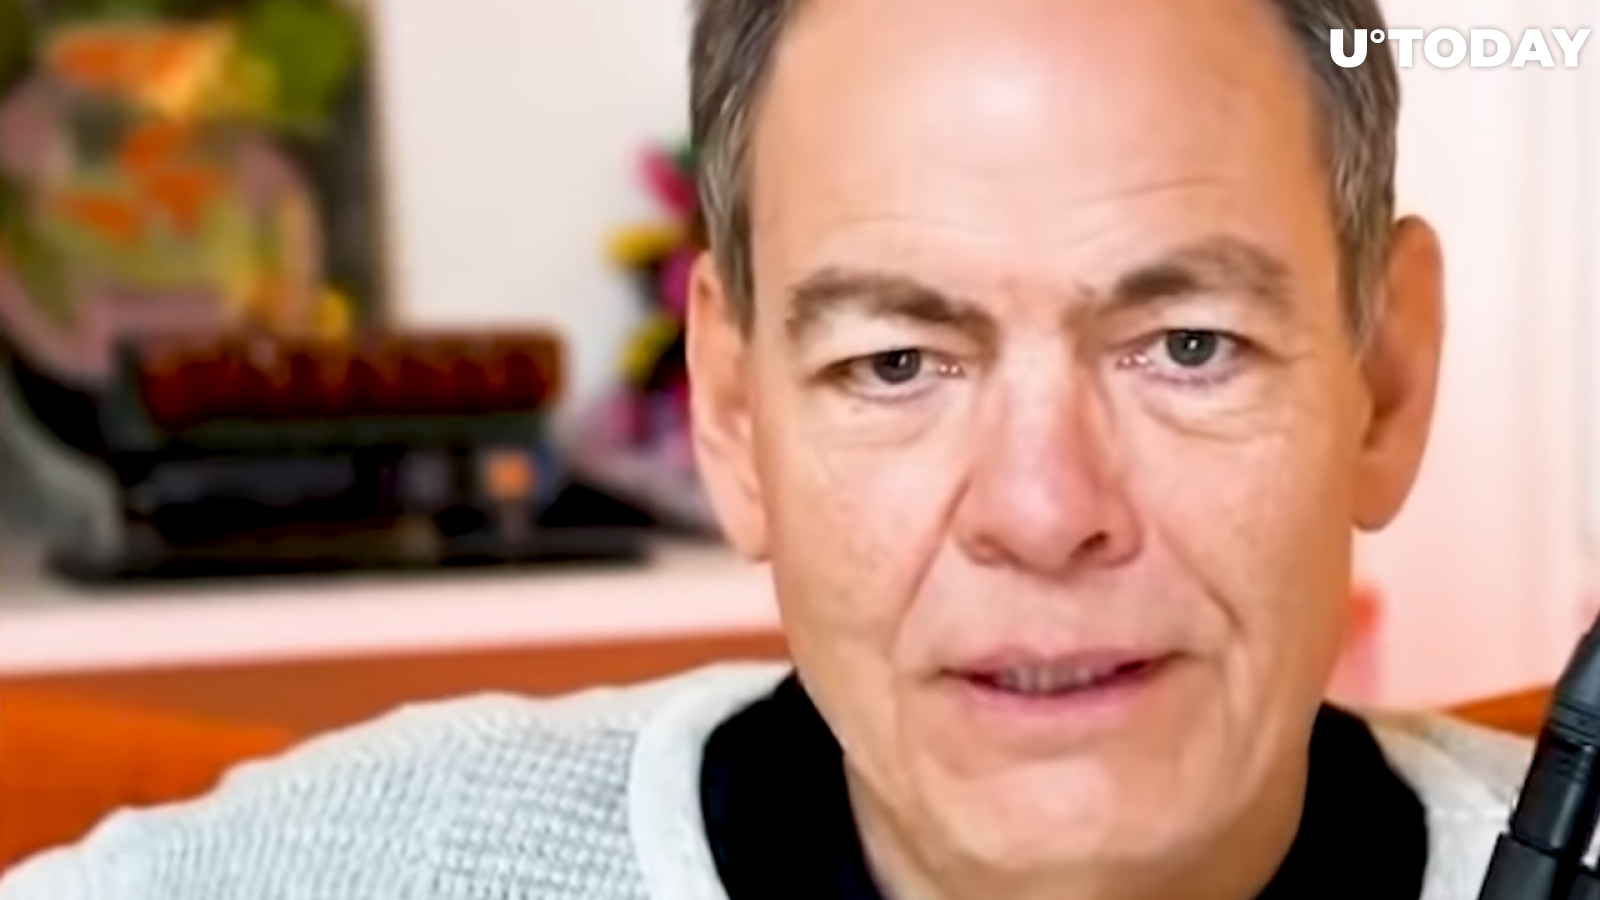 Bitcoiner Max Keiser Slams LUNA, Calling It Great Example of All "DeFi Scams"